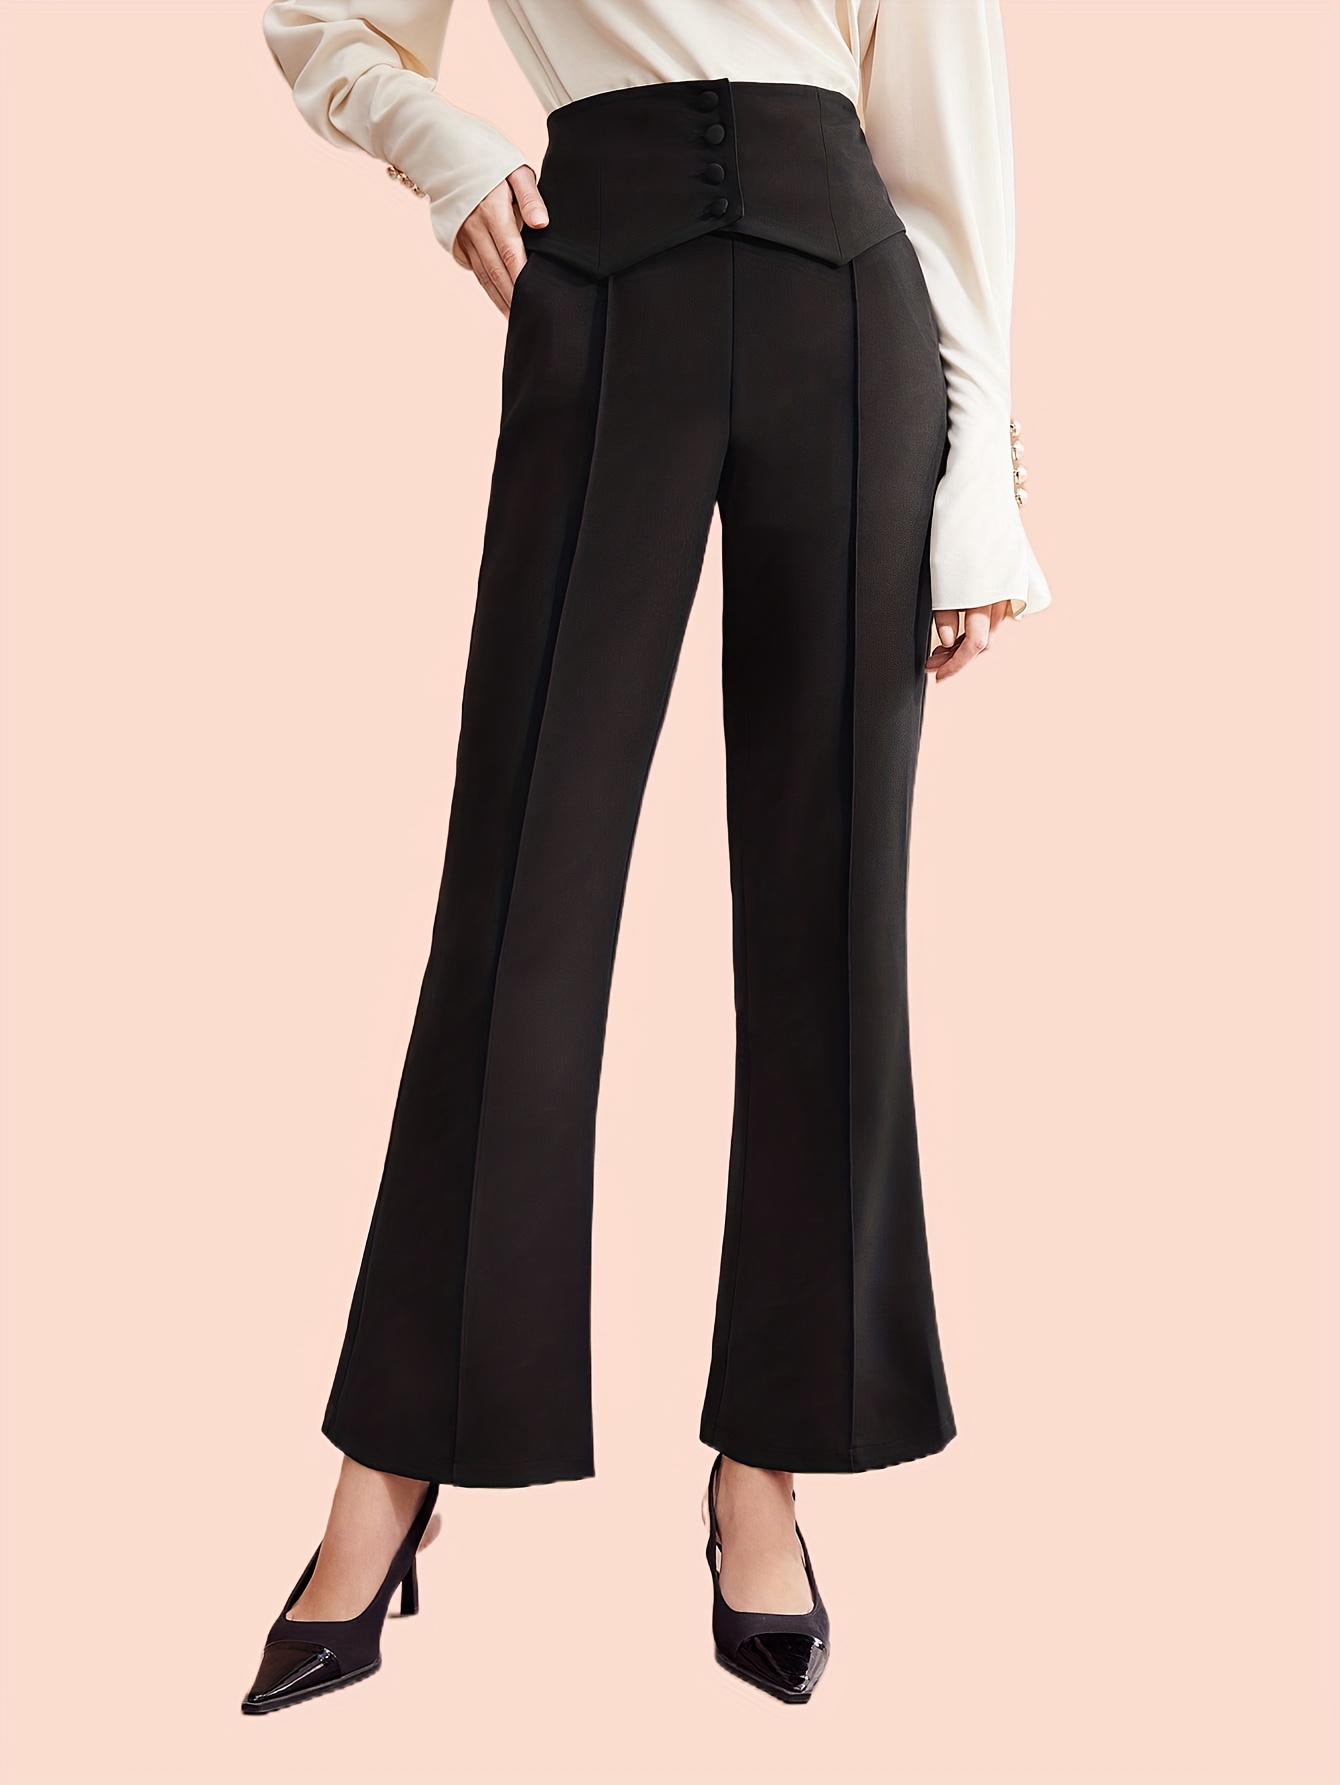 KOJOOIN Flare Dress Pants for Women Business Casual High Waisted Pants with  Pockets Side Slit Stretchy Work Pants Light Apricot S at  Women's  Clothing store